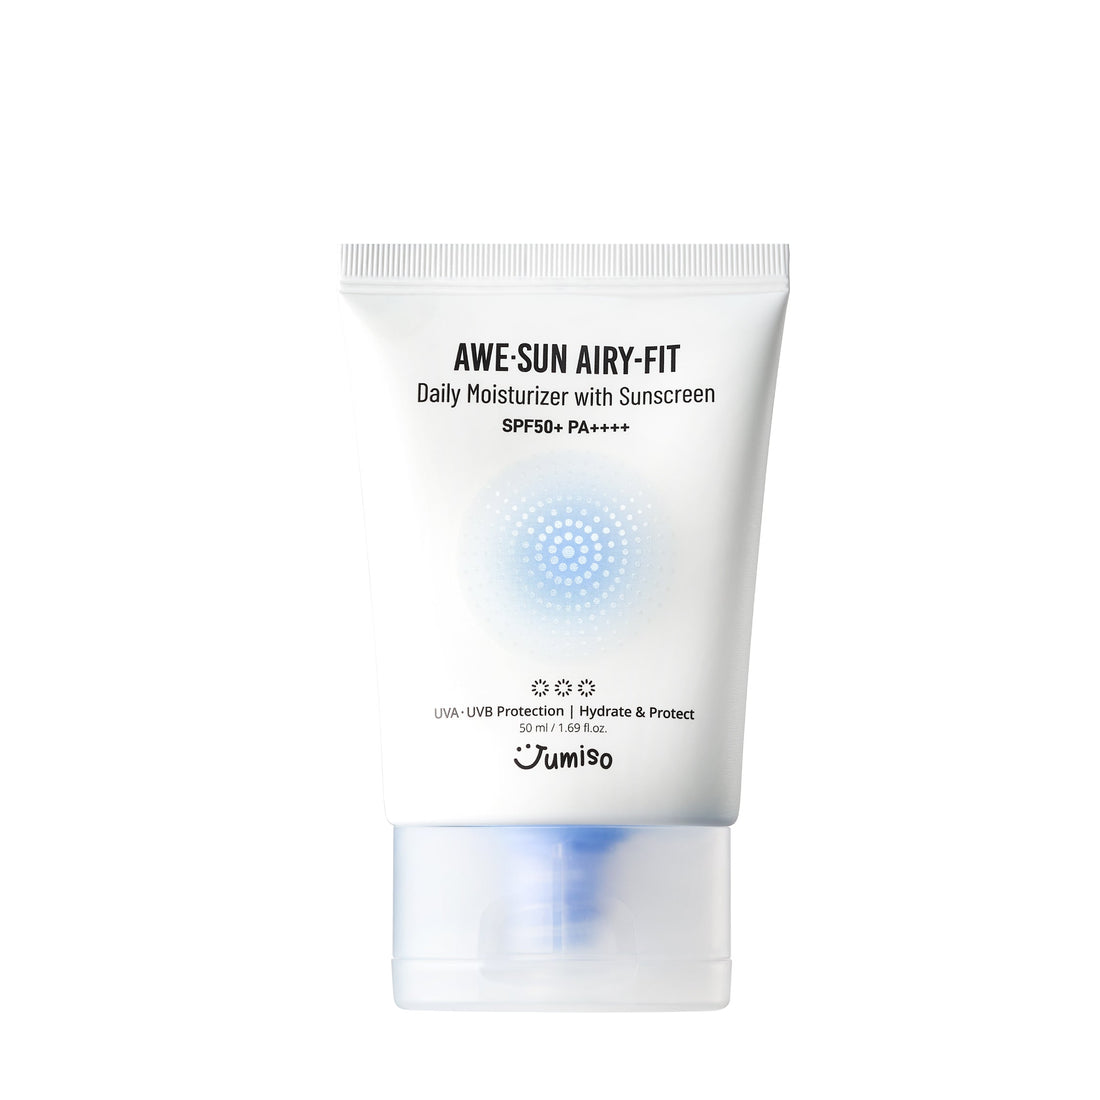 [BOGO] AWE⋅SUN AIRY-FIT Daily Moisturizer with Sunscreen SPF50+ PA++++ 50ml